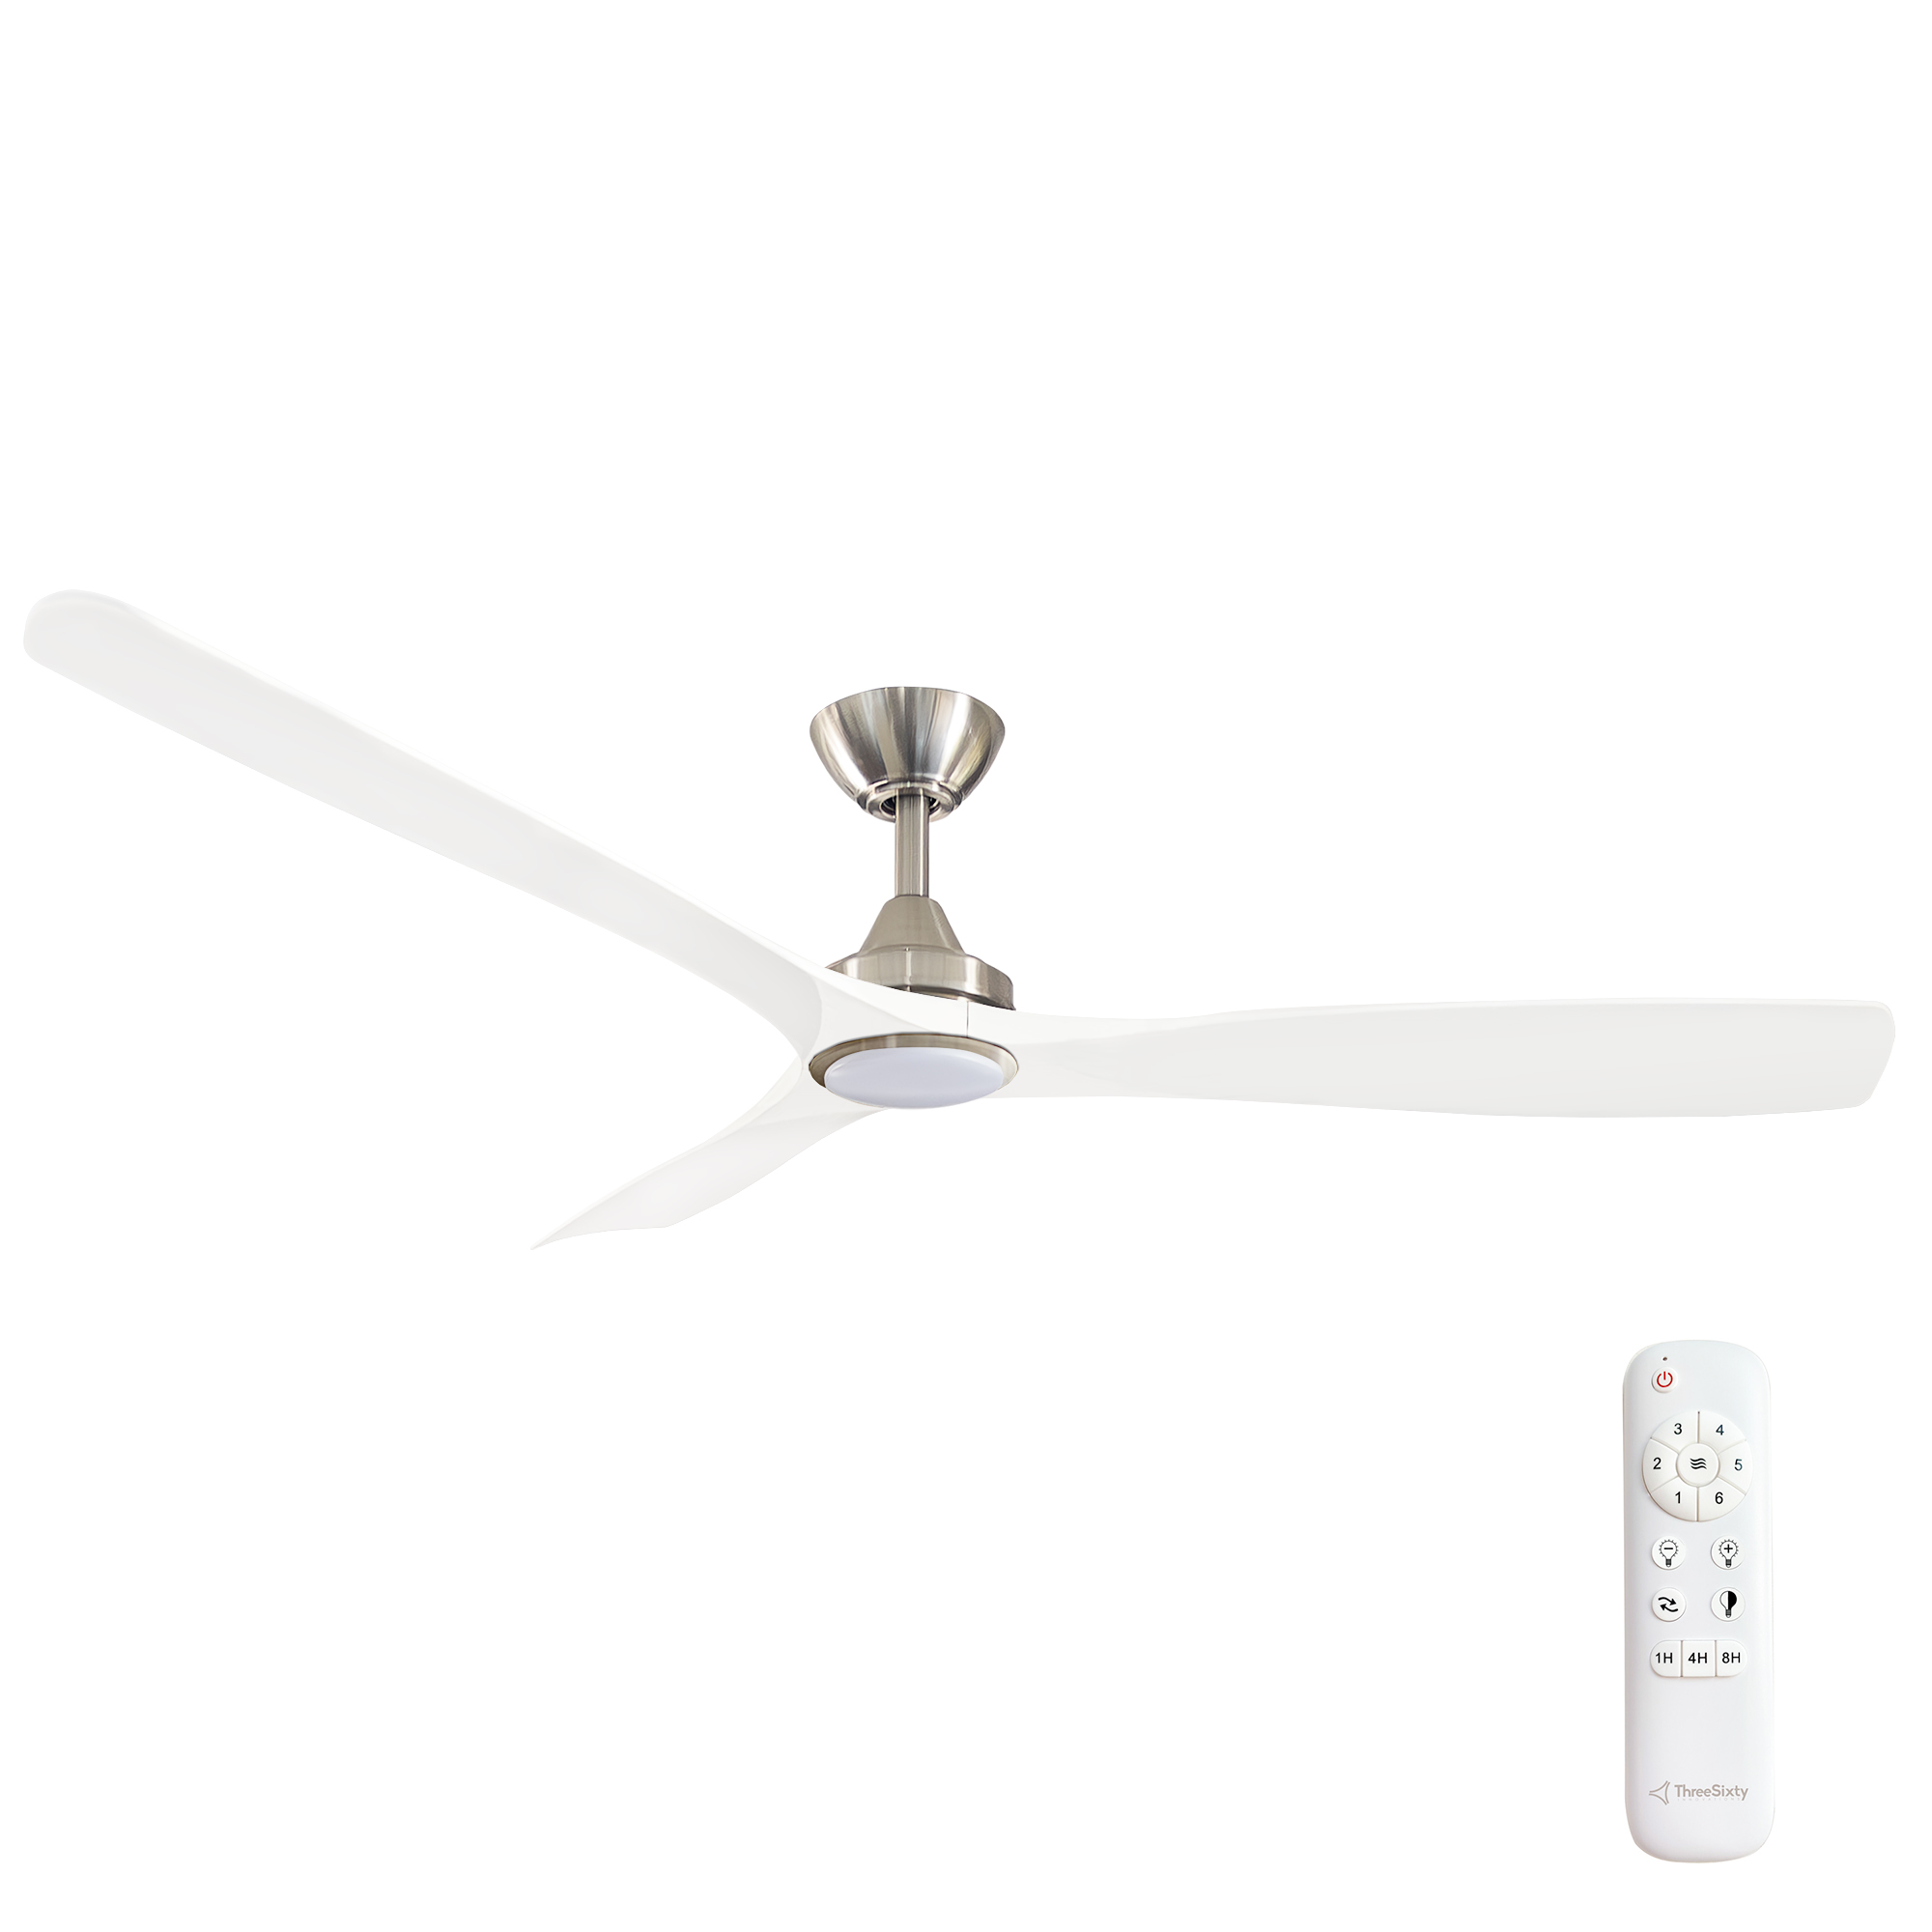 60" Spitfire DC Ceiling Fan in Brushed Nickel with White blades and 18W CCT LED Light